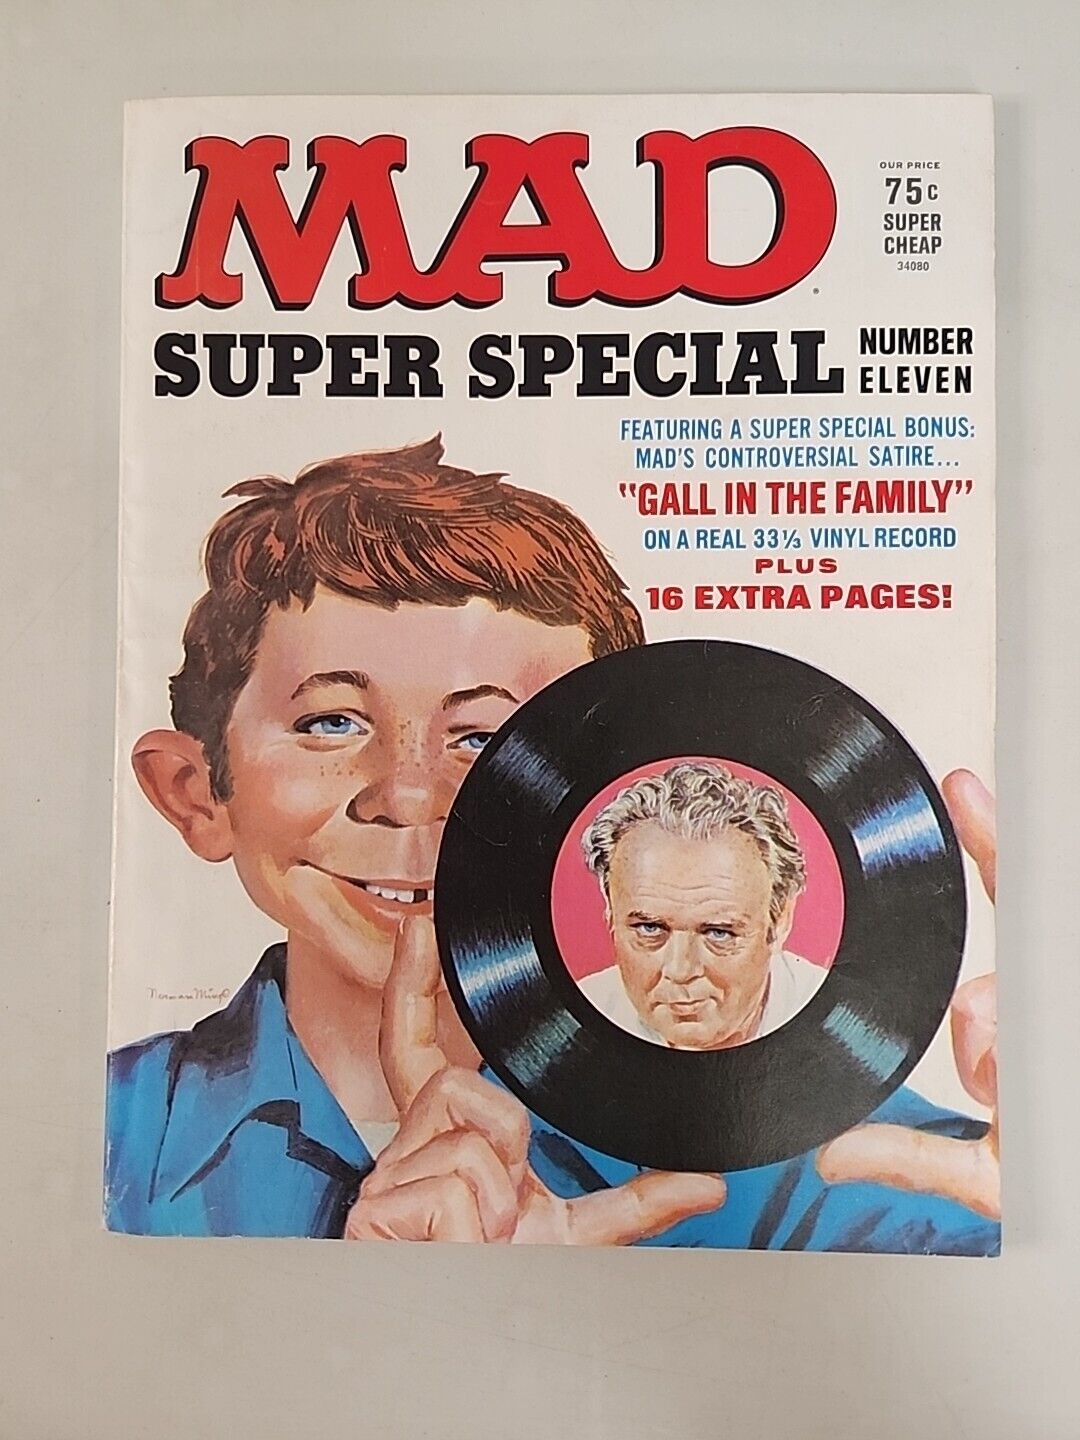 Mad Special Number 11 With Insert